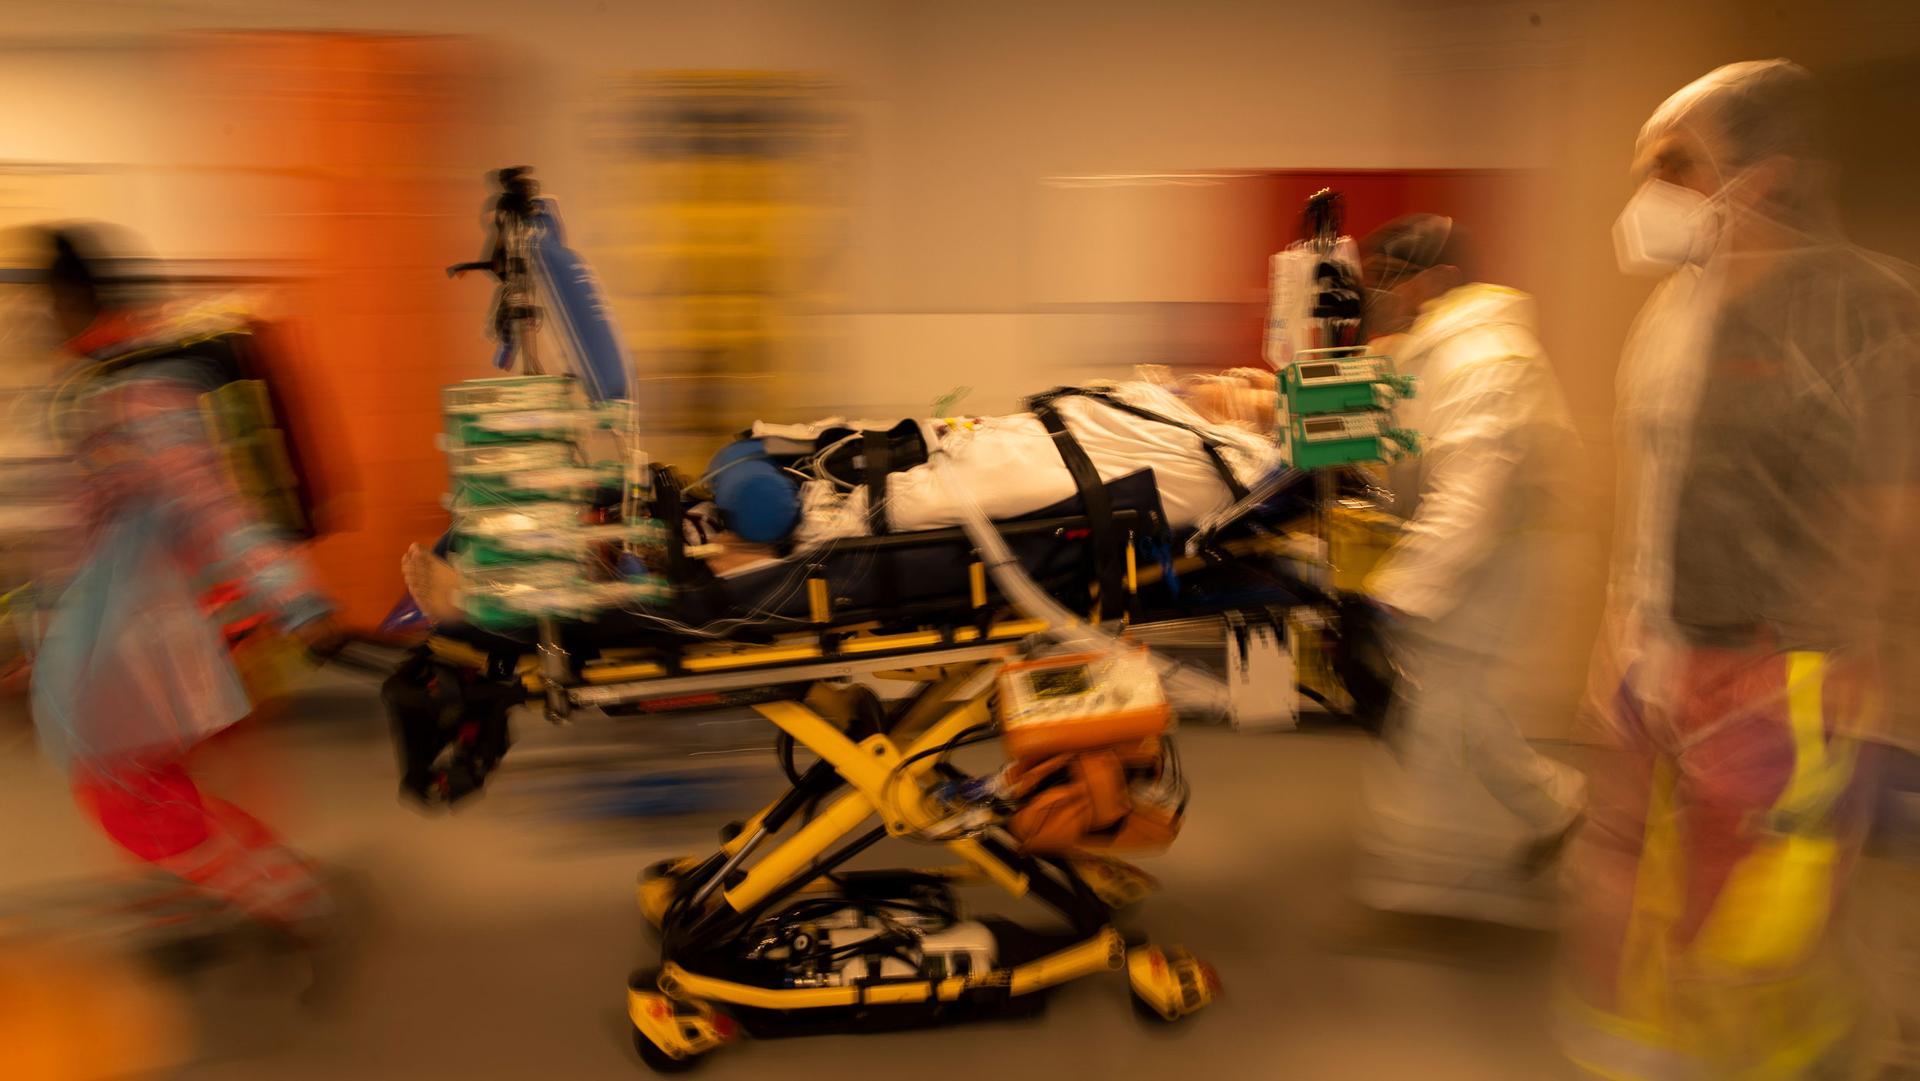 A COVID-19 patient is shown strapped to a yellow gurney with several medical staff moving along side in a blurred motion photograph.